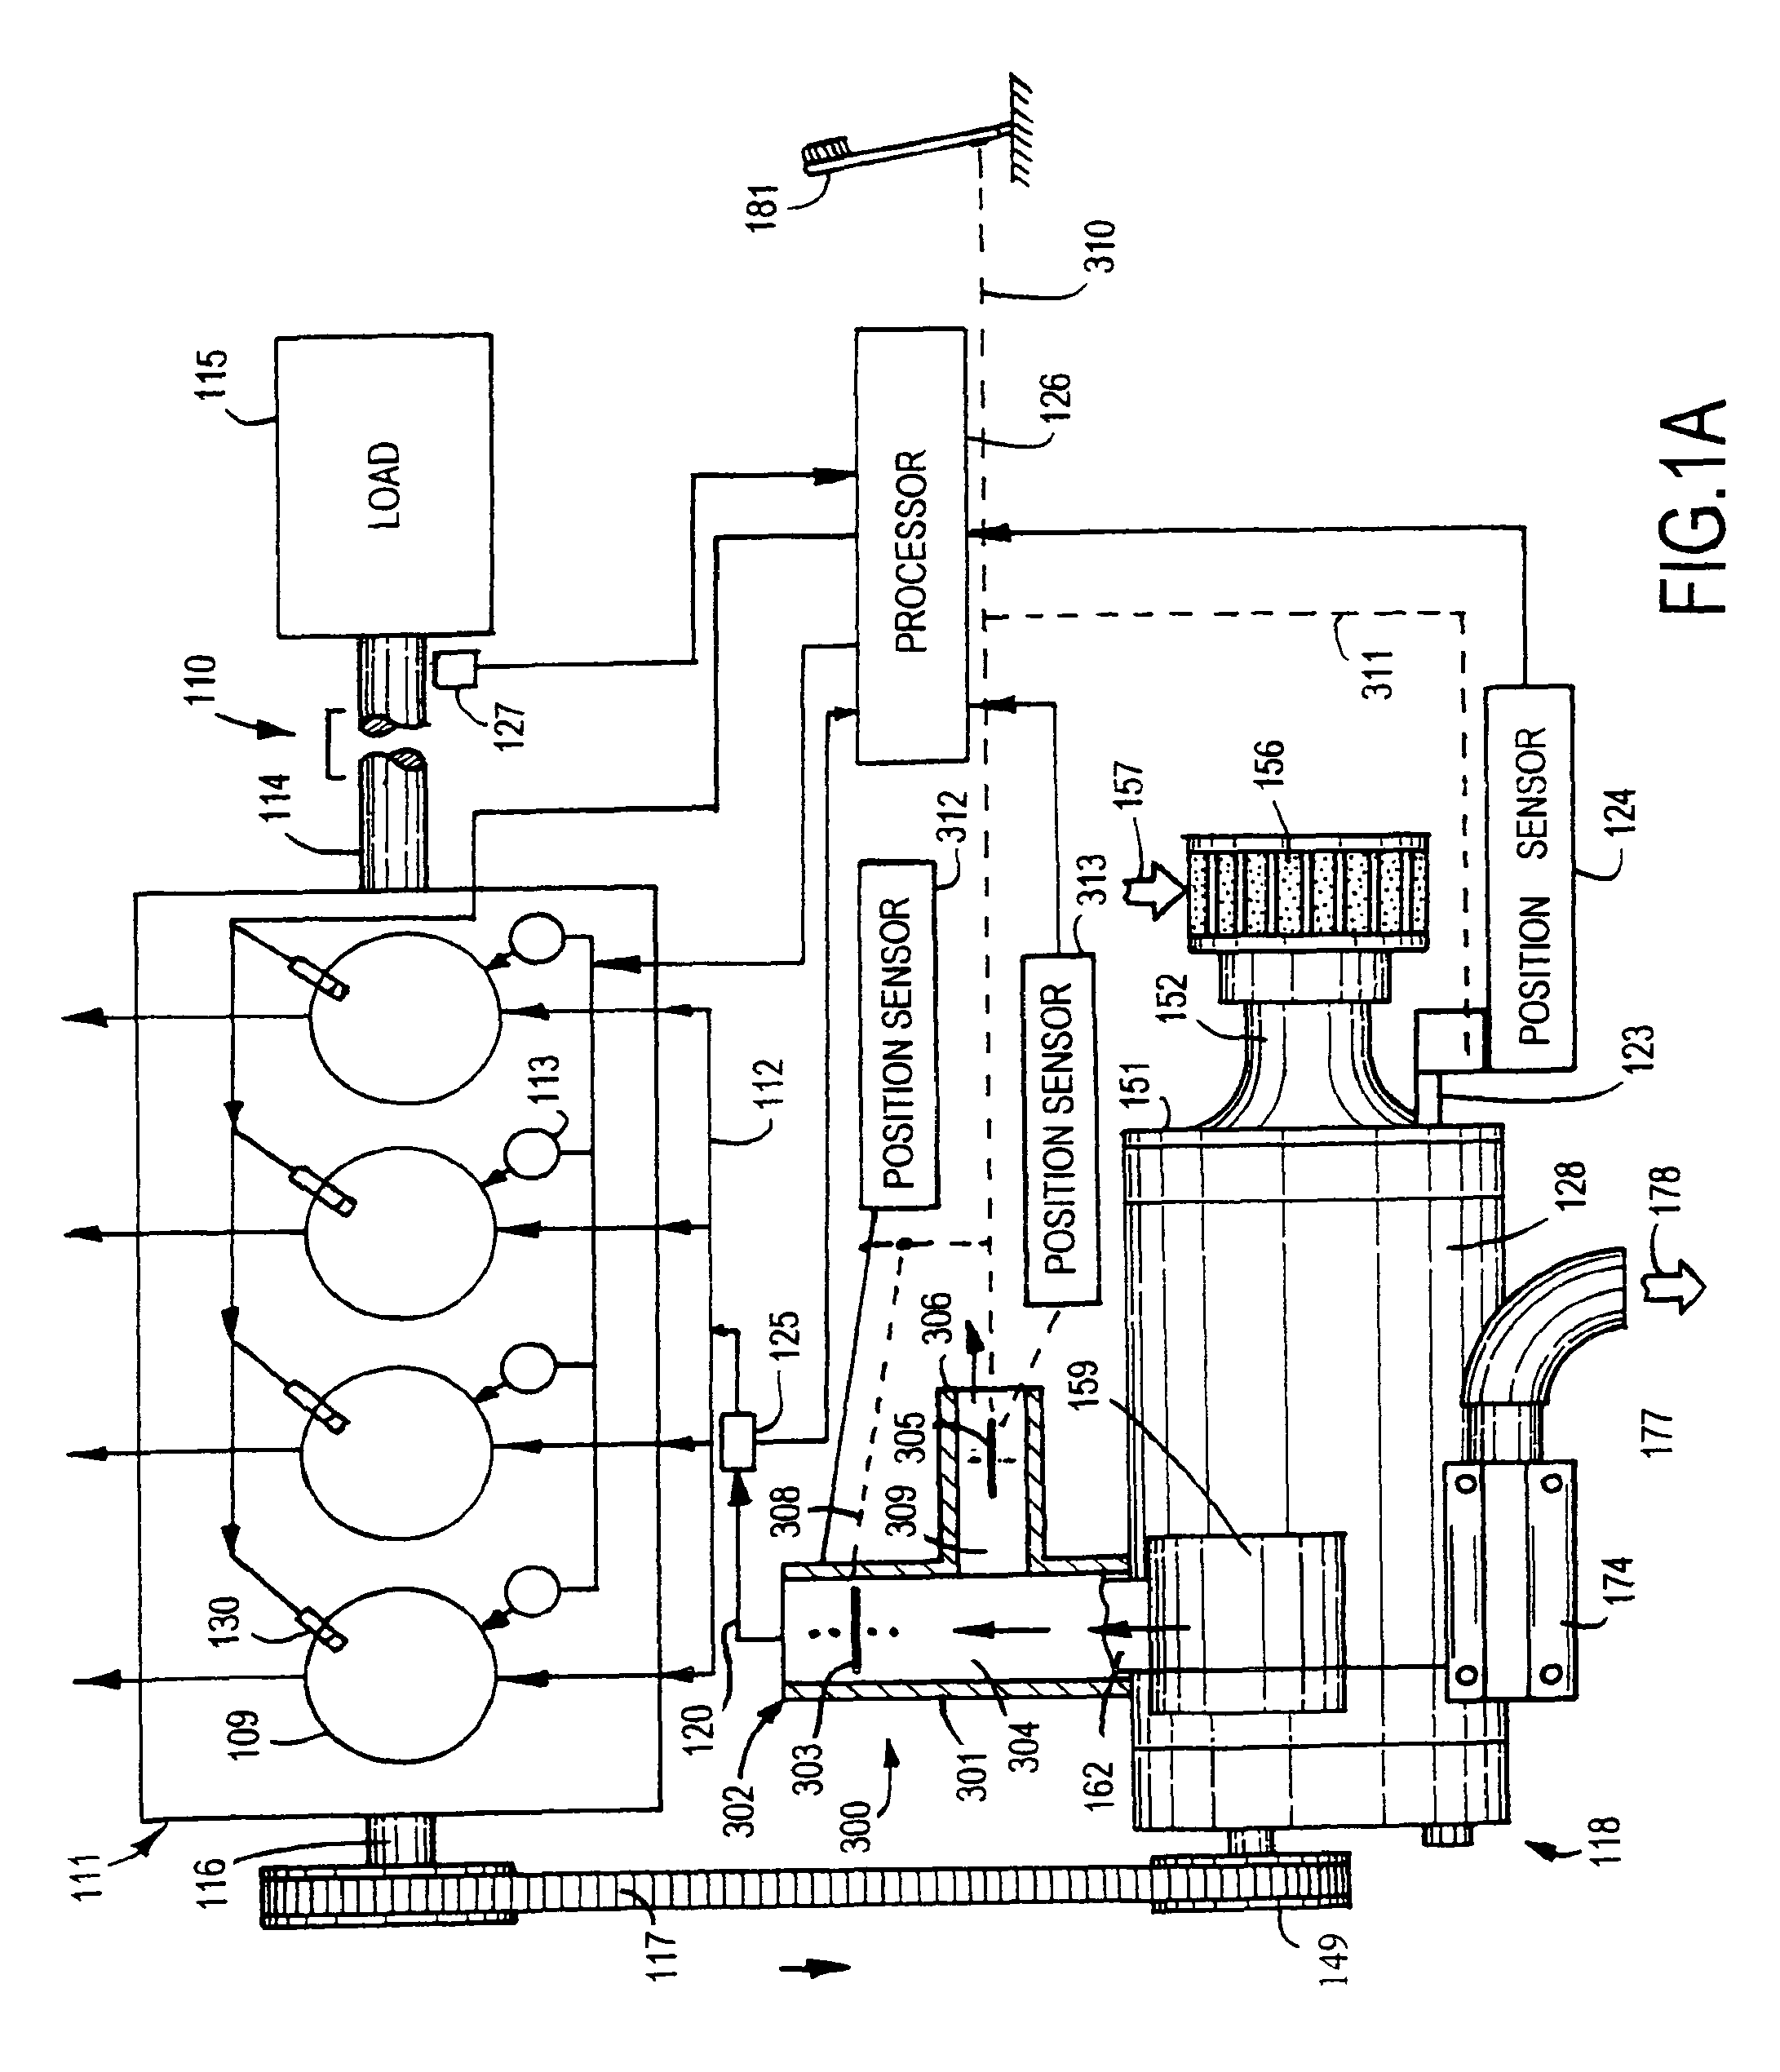 Internal combustion engine and supercharger